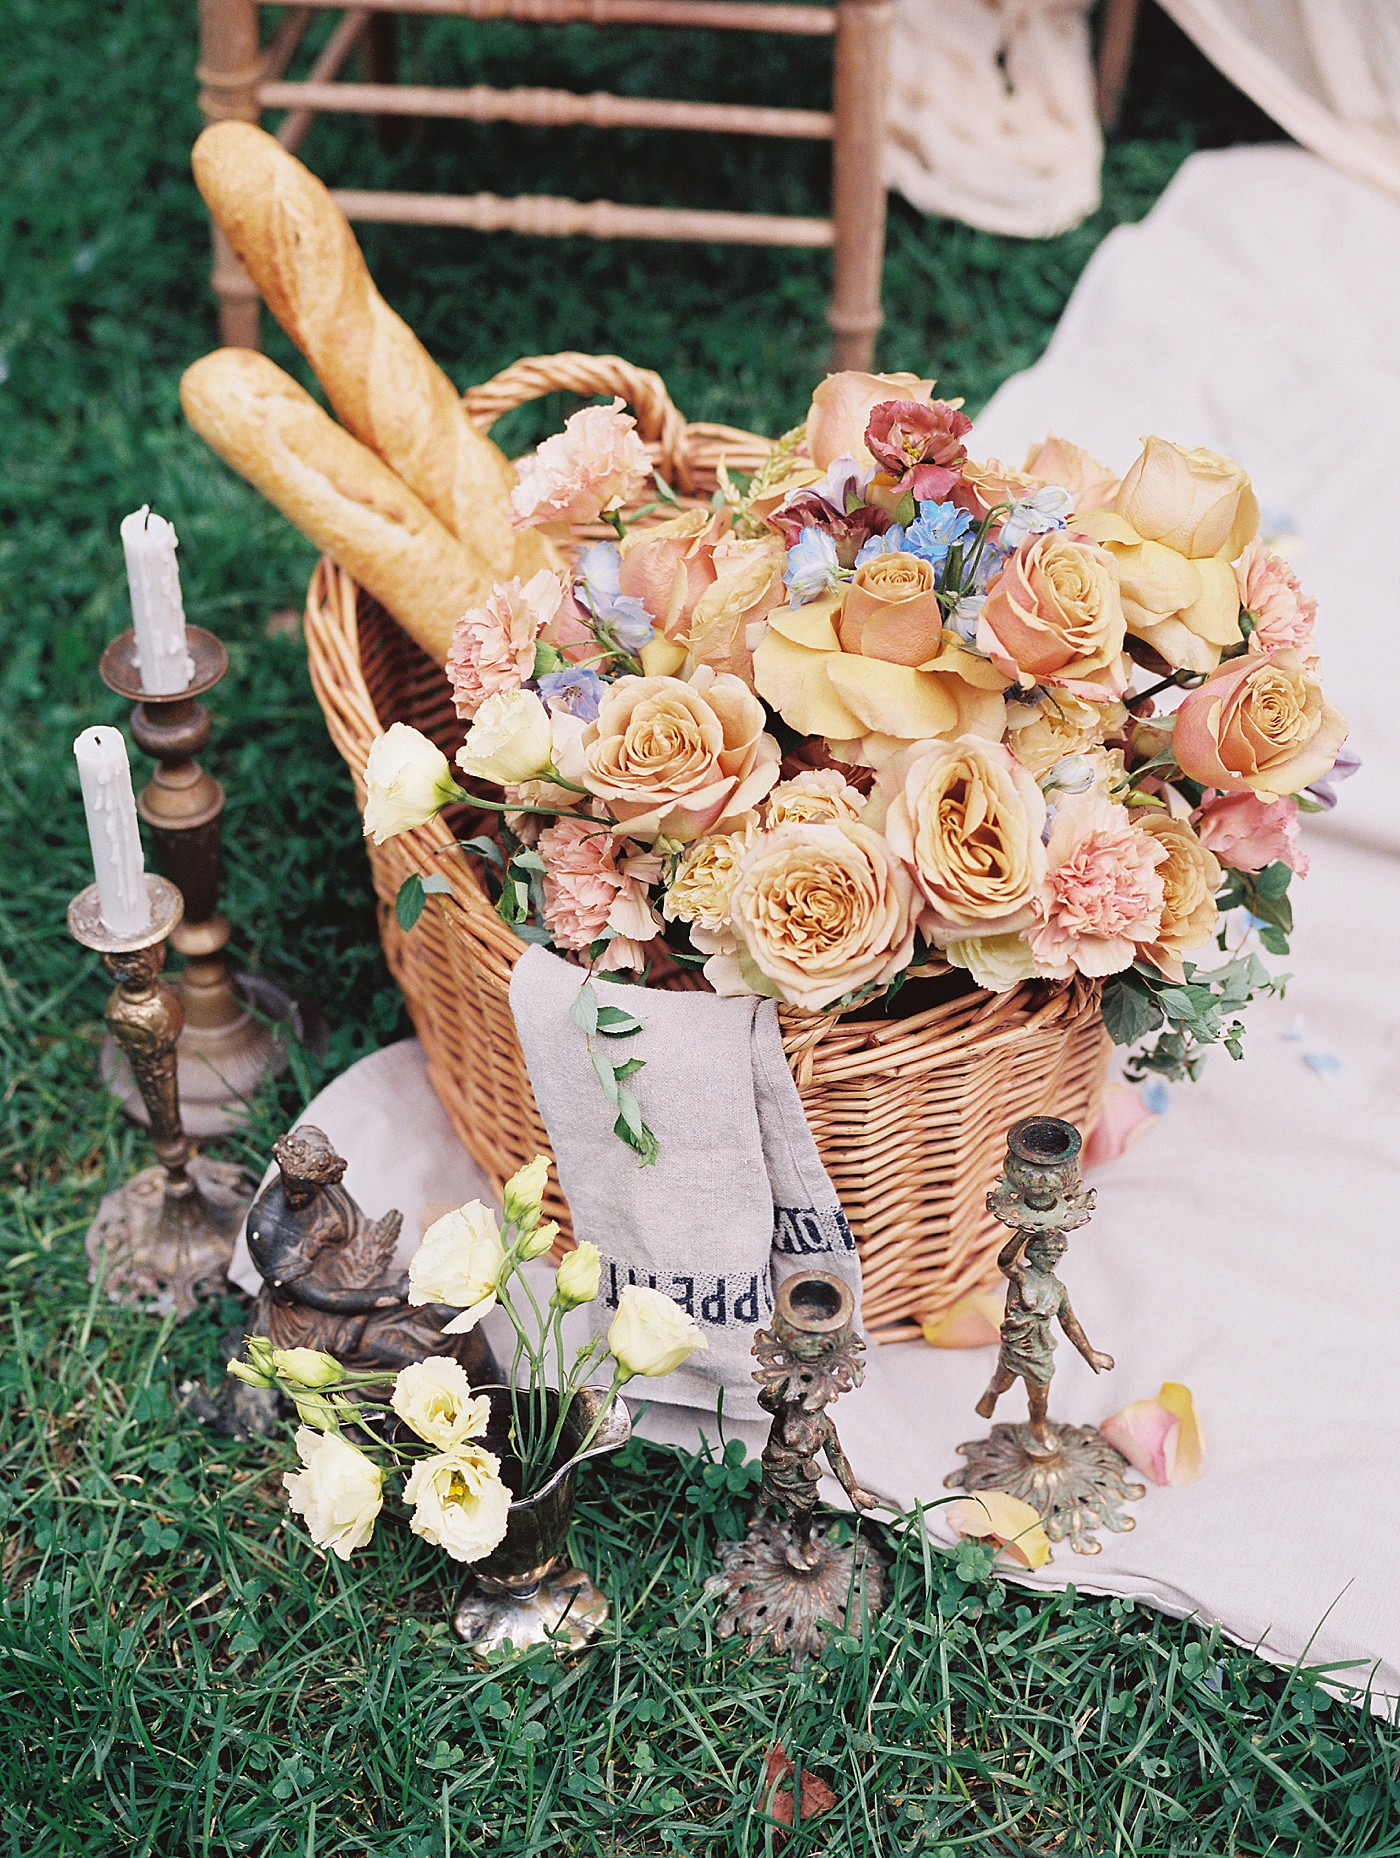 Vintage candlesticks styled with roses and baguettes | Image by Hope Helmuth Photography